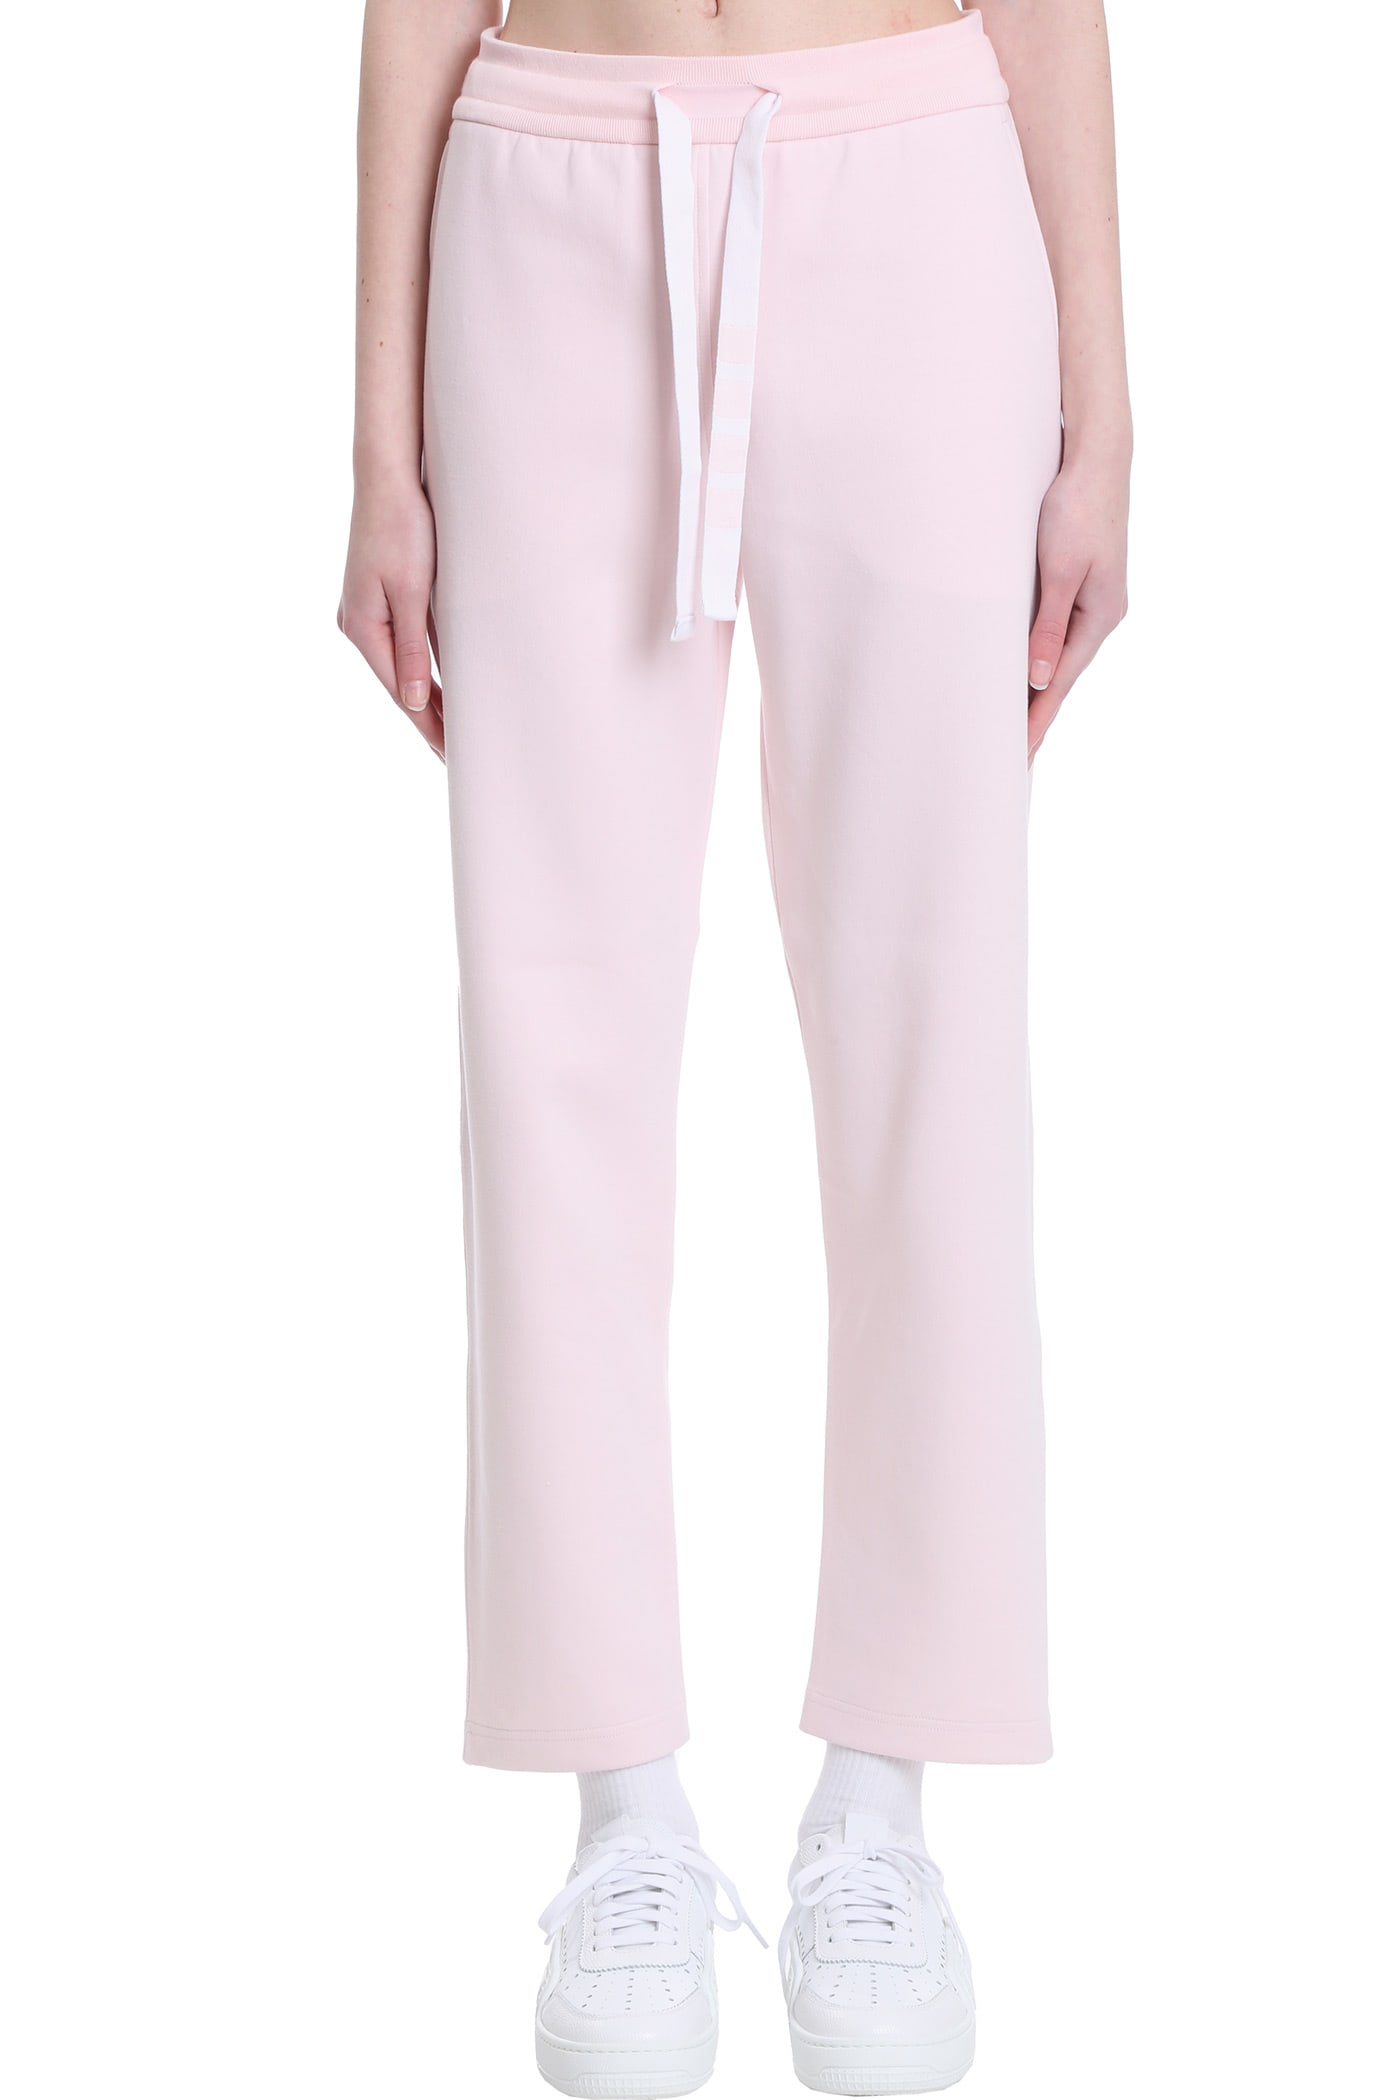 THOM BROWNE PANTS IN ROSE-PINK COTTON,FJQ040A03034680